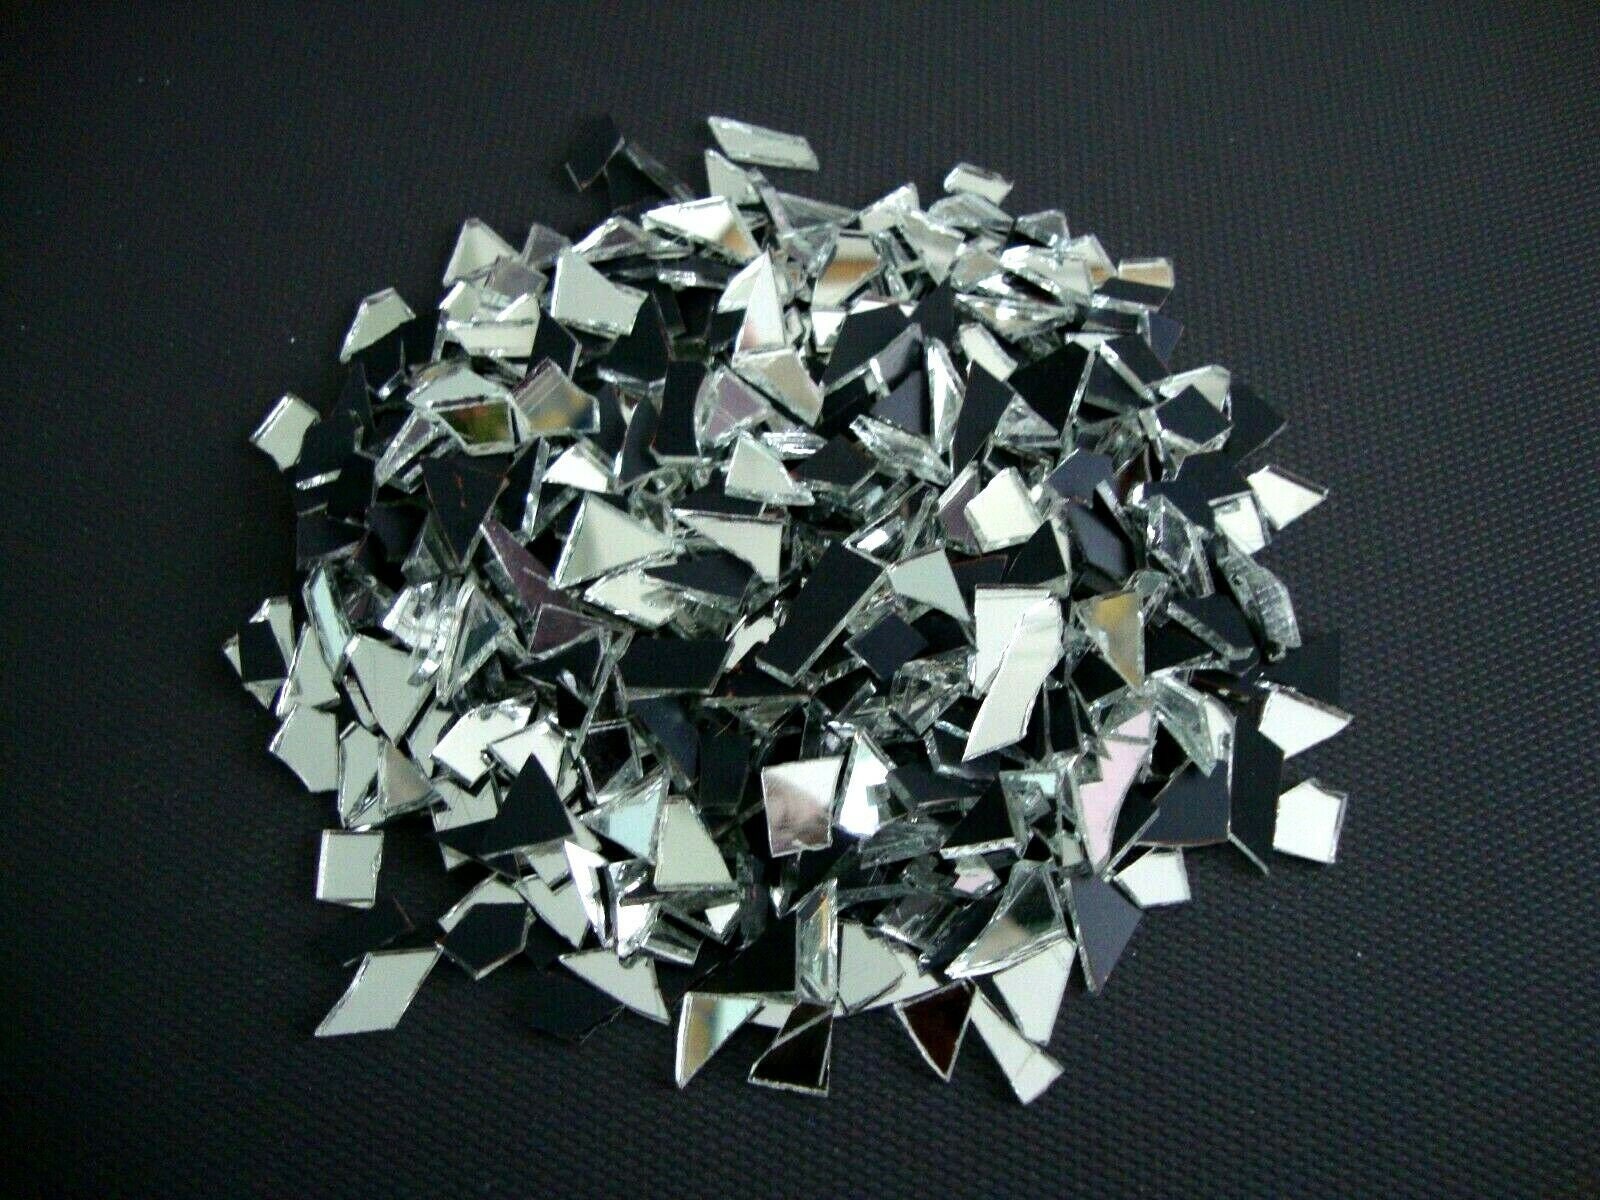 70 pieces Silver Glass Mirror Tile 2 mm Thick Art&Craft Approx 1 x 1 cm 